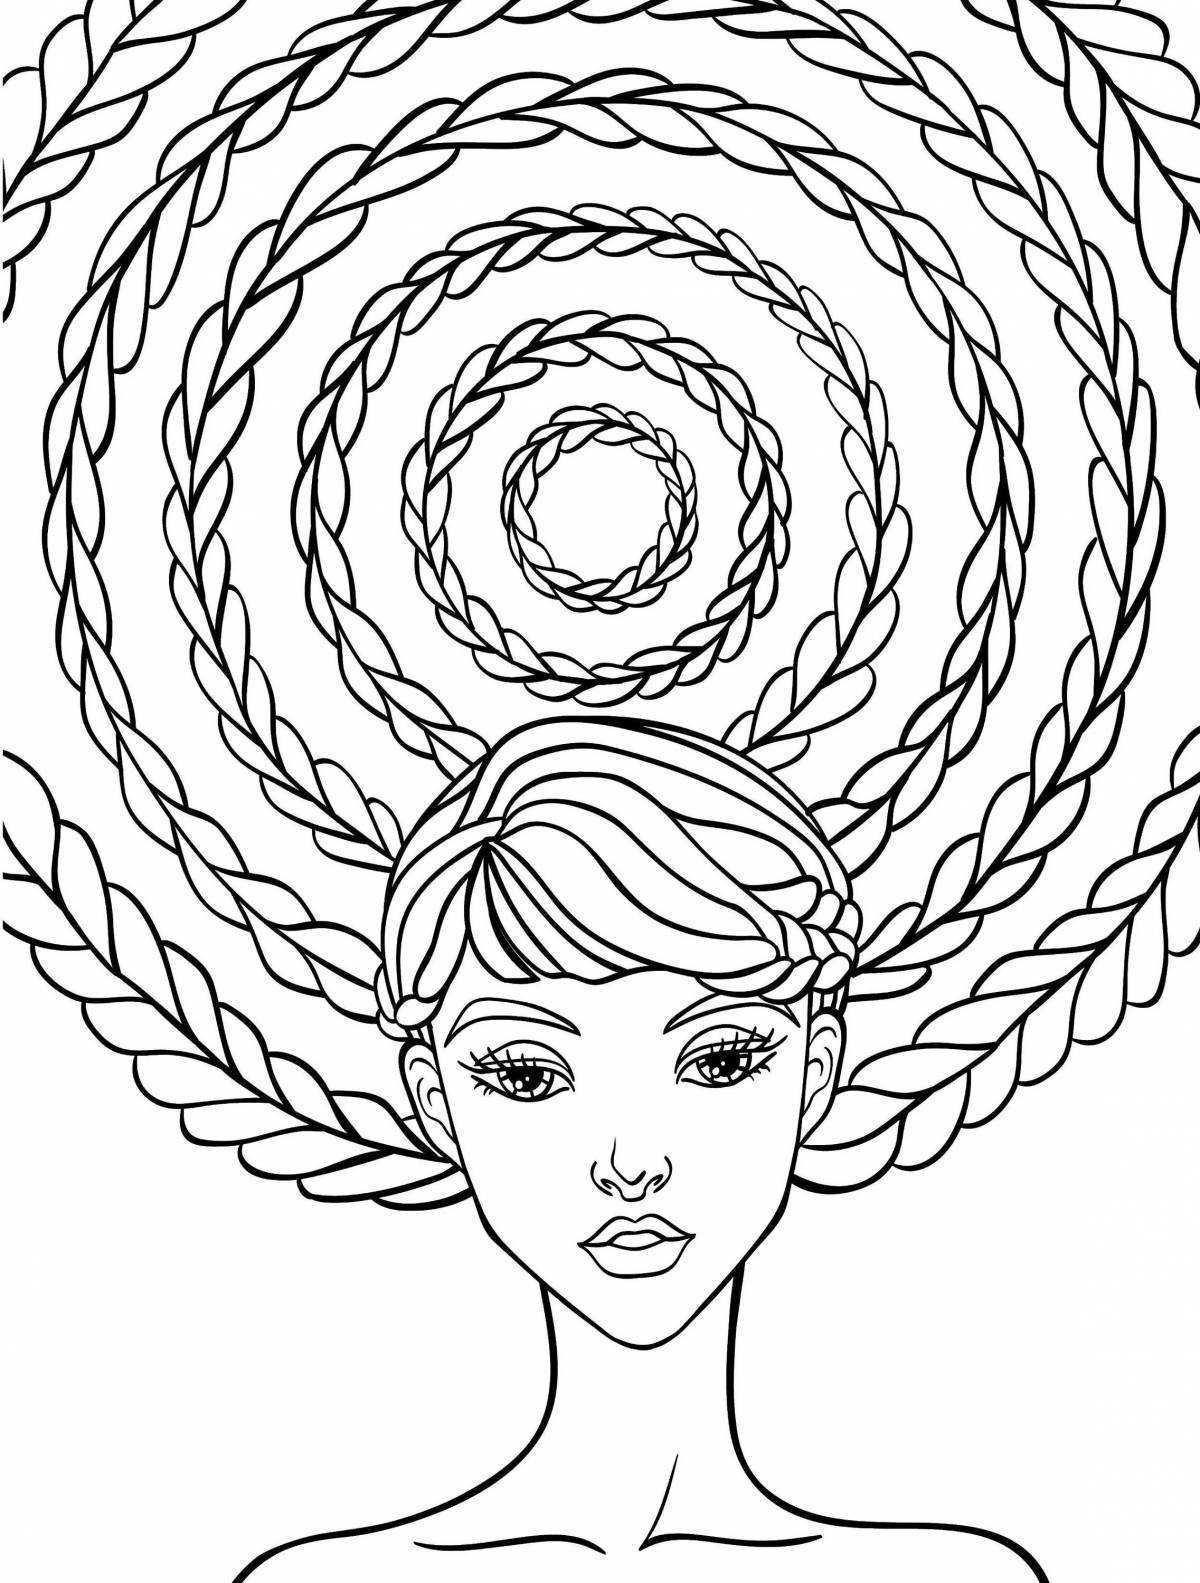 Awesome spiral environment coloring page